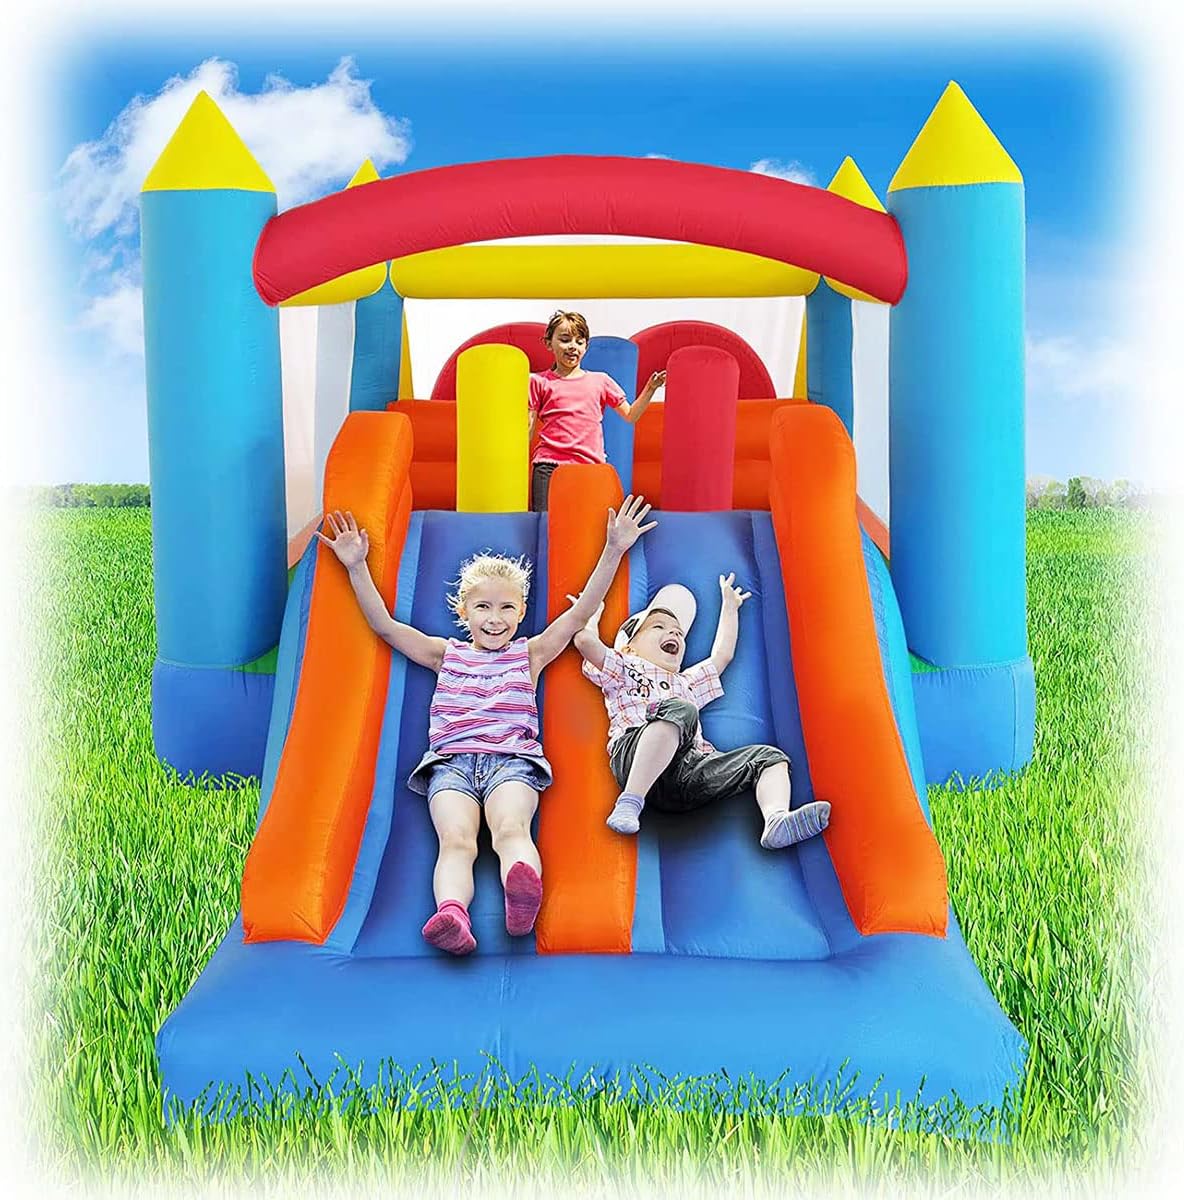 Ballsea Inflatable Bouncy Castle, Kids Bounce House Inflatable Trampoline Dual Slide, Inflatable Jumper Play Center with Air Blower for Kids Indoor Outdoor, 4.88 x 2.4 x 1.9m